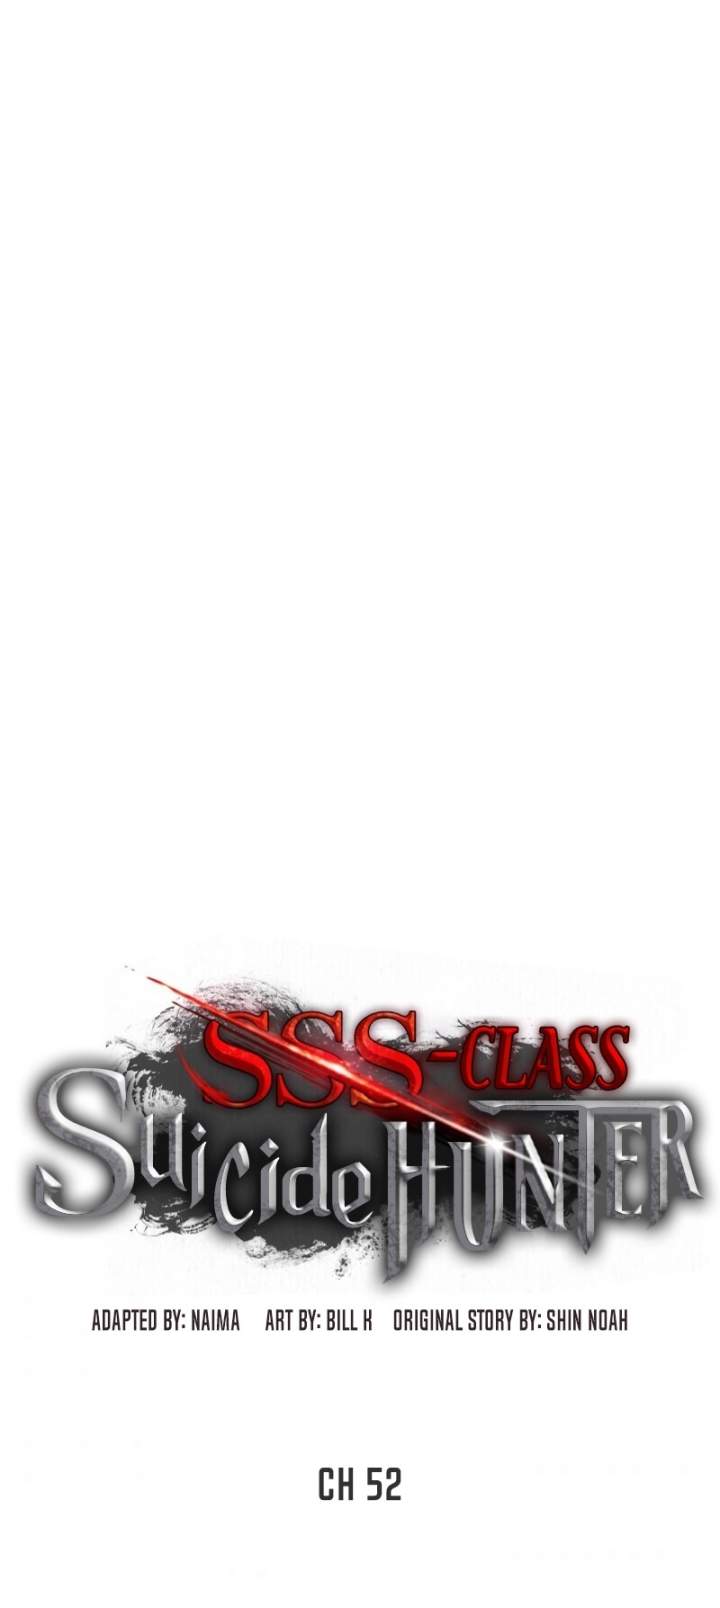 SSS-Class Suicide Hunter Chapter 52